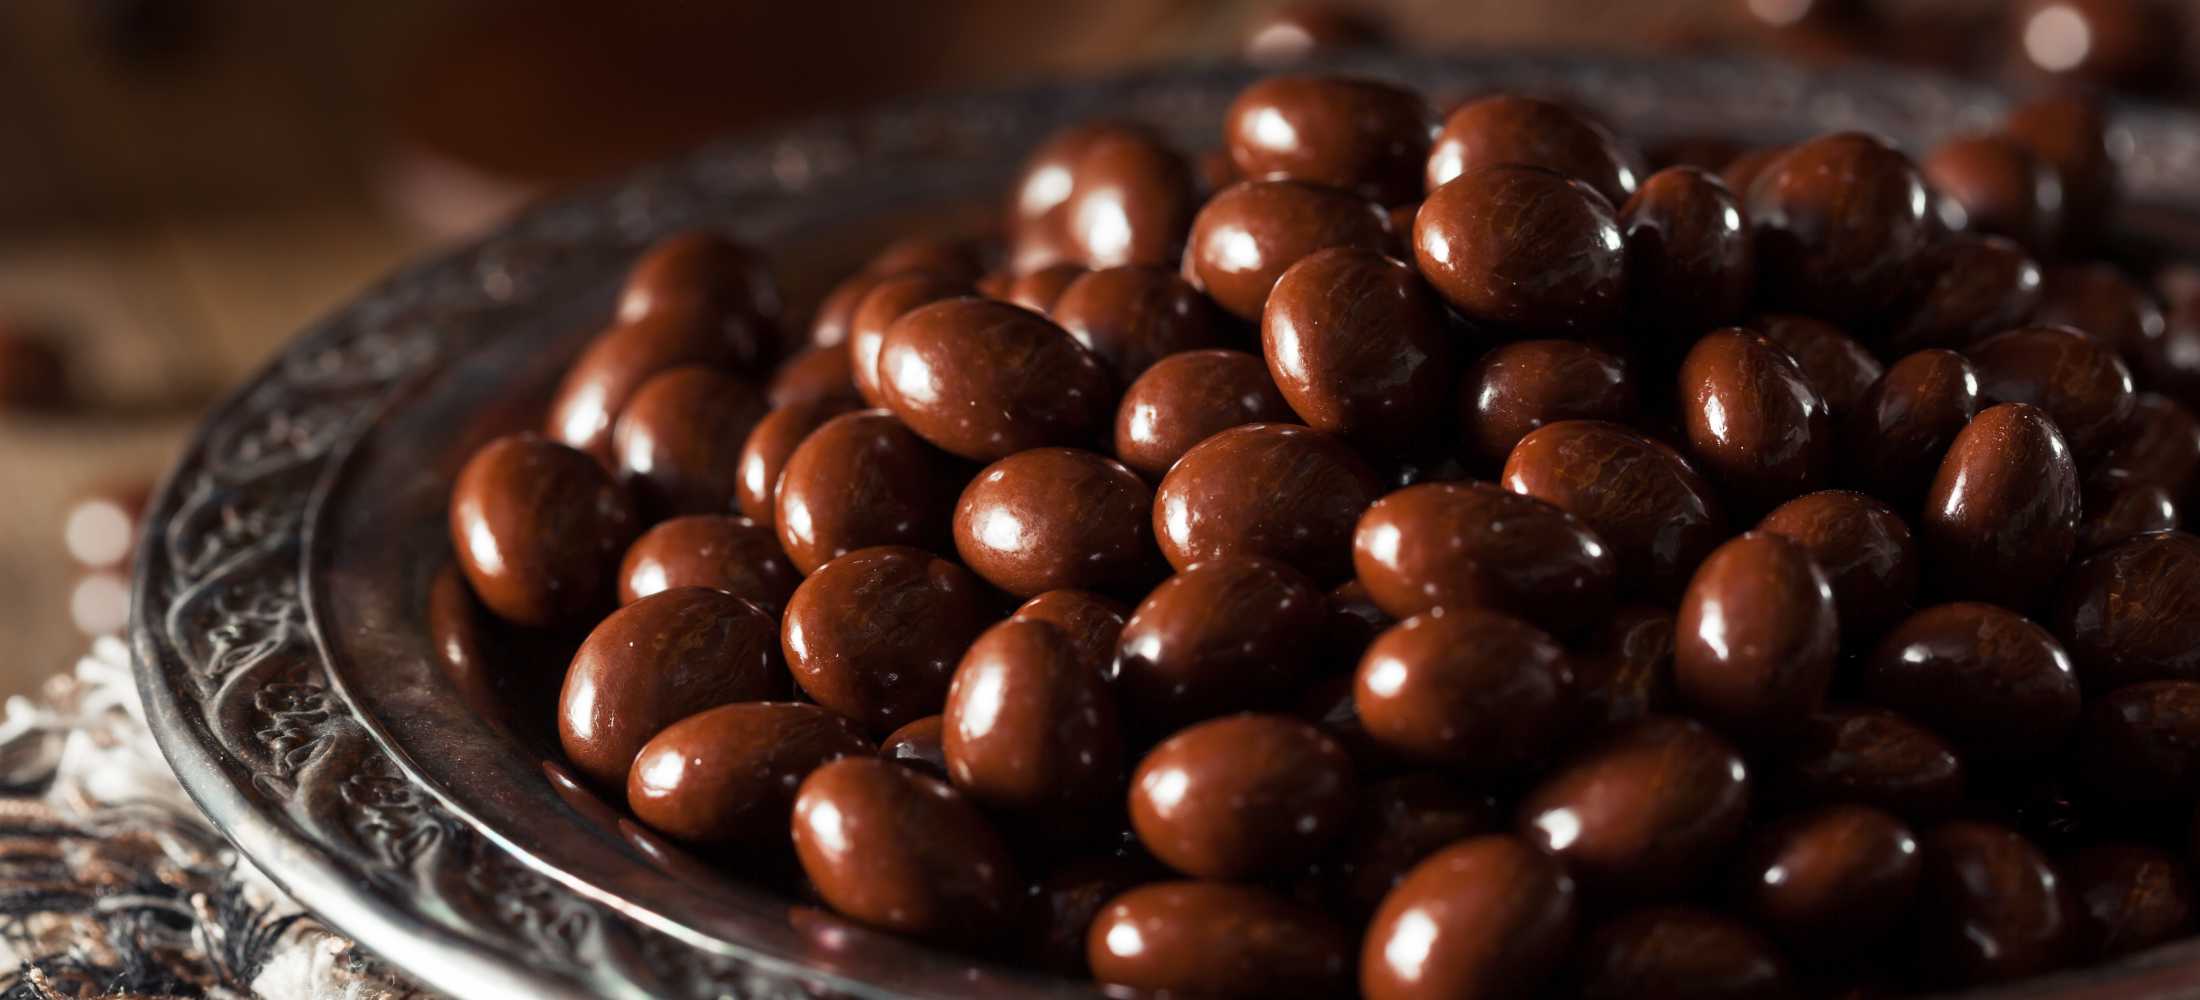 Are Chocolate-Covered Espresso Beans Good for You? The Science Behind Eating Coffee